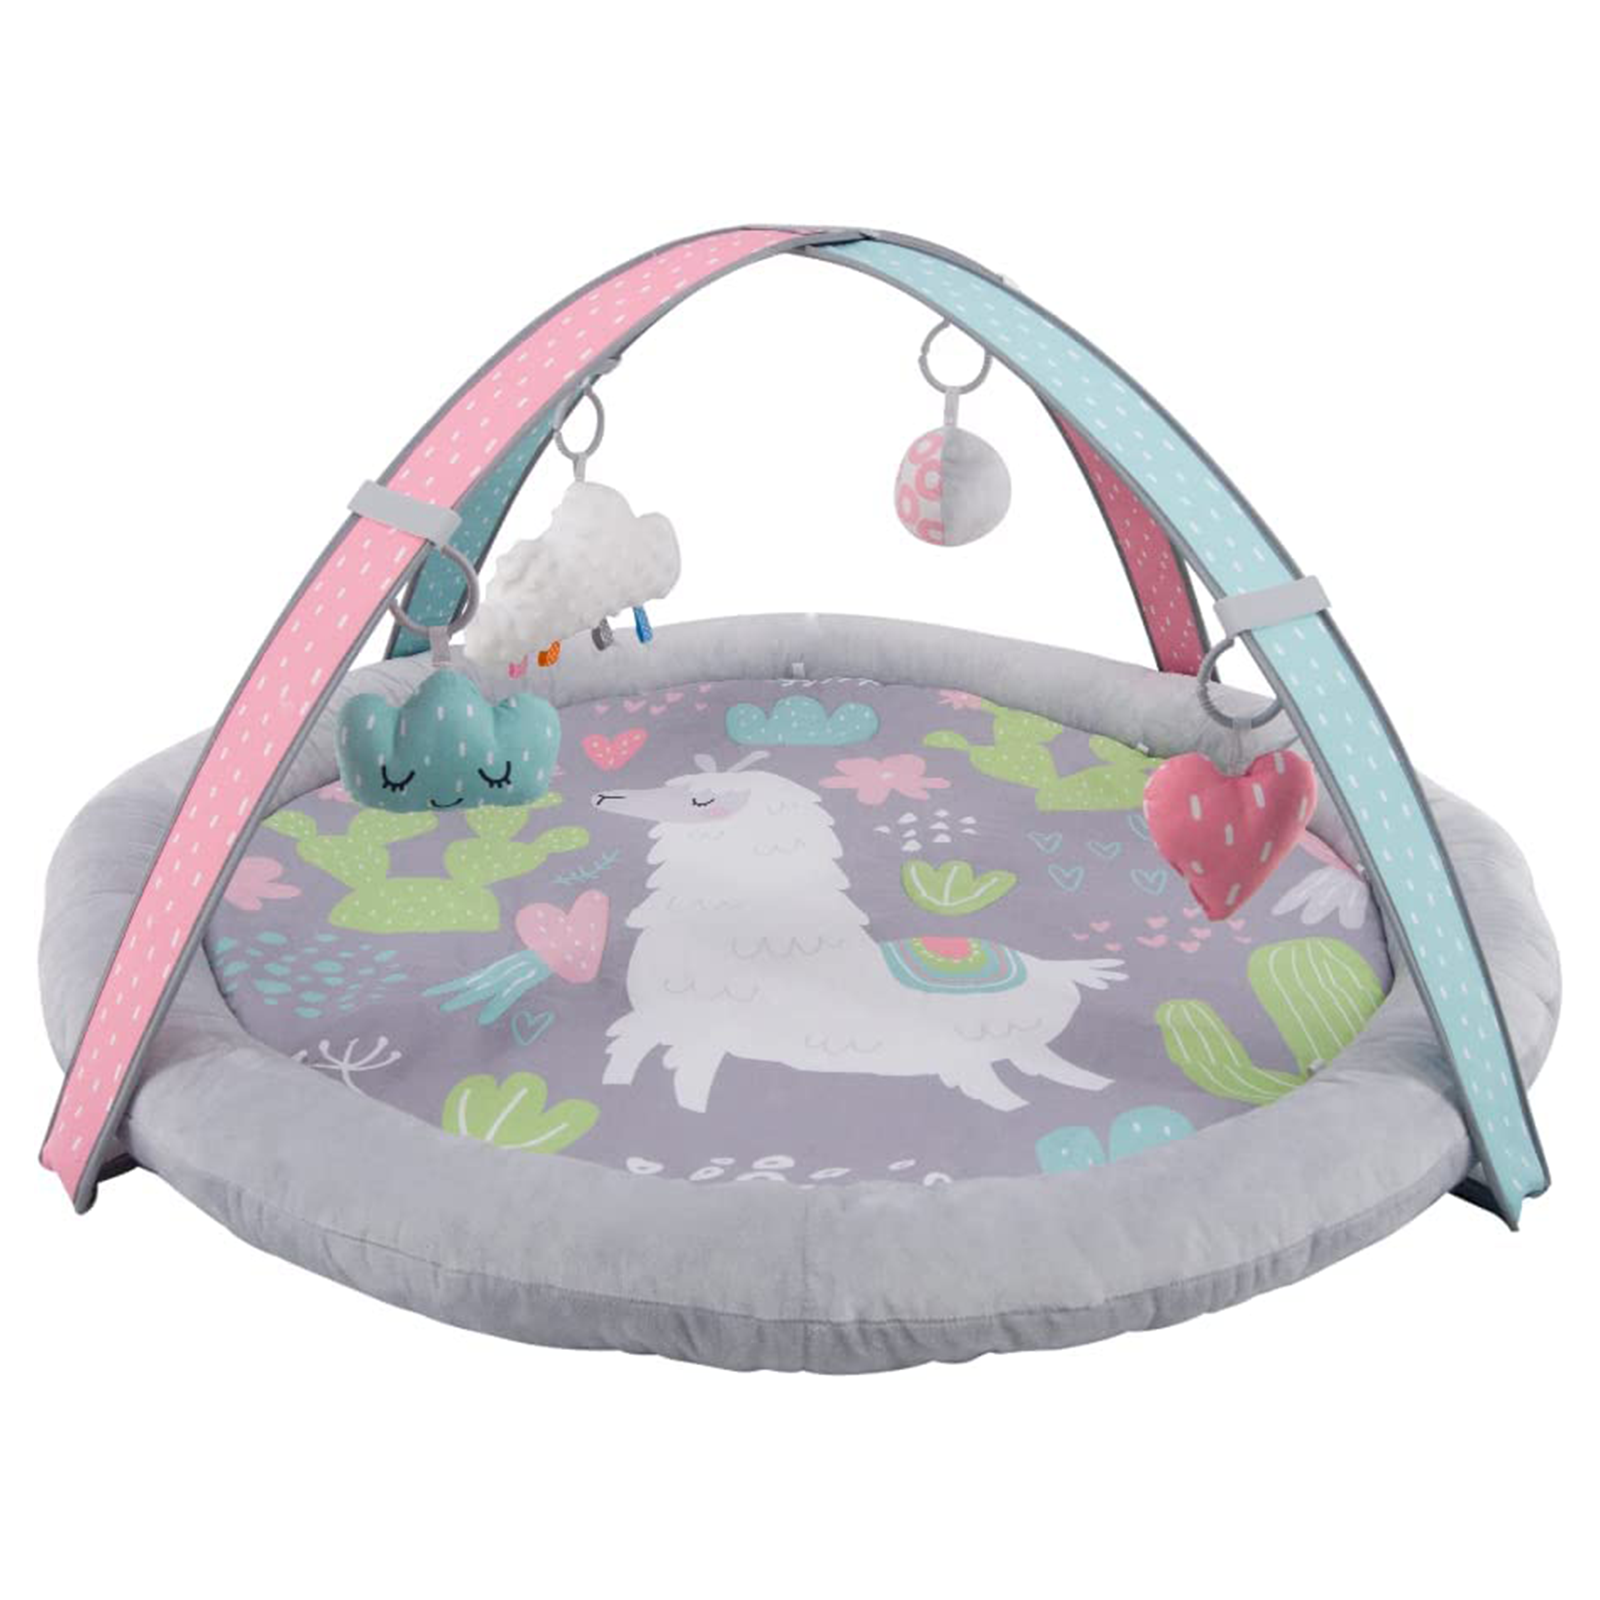 Ladida Llama Soft Padded Activity Baby Playmat Gym (From Birth to 6 Months) - Grey